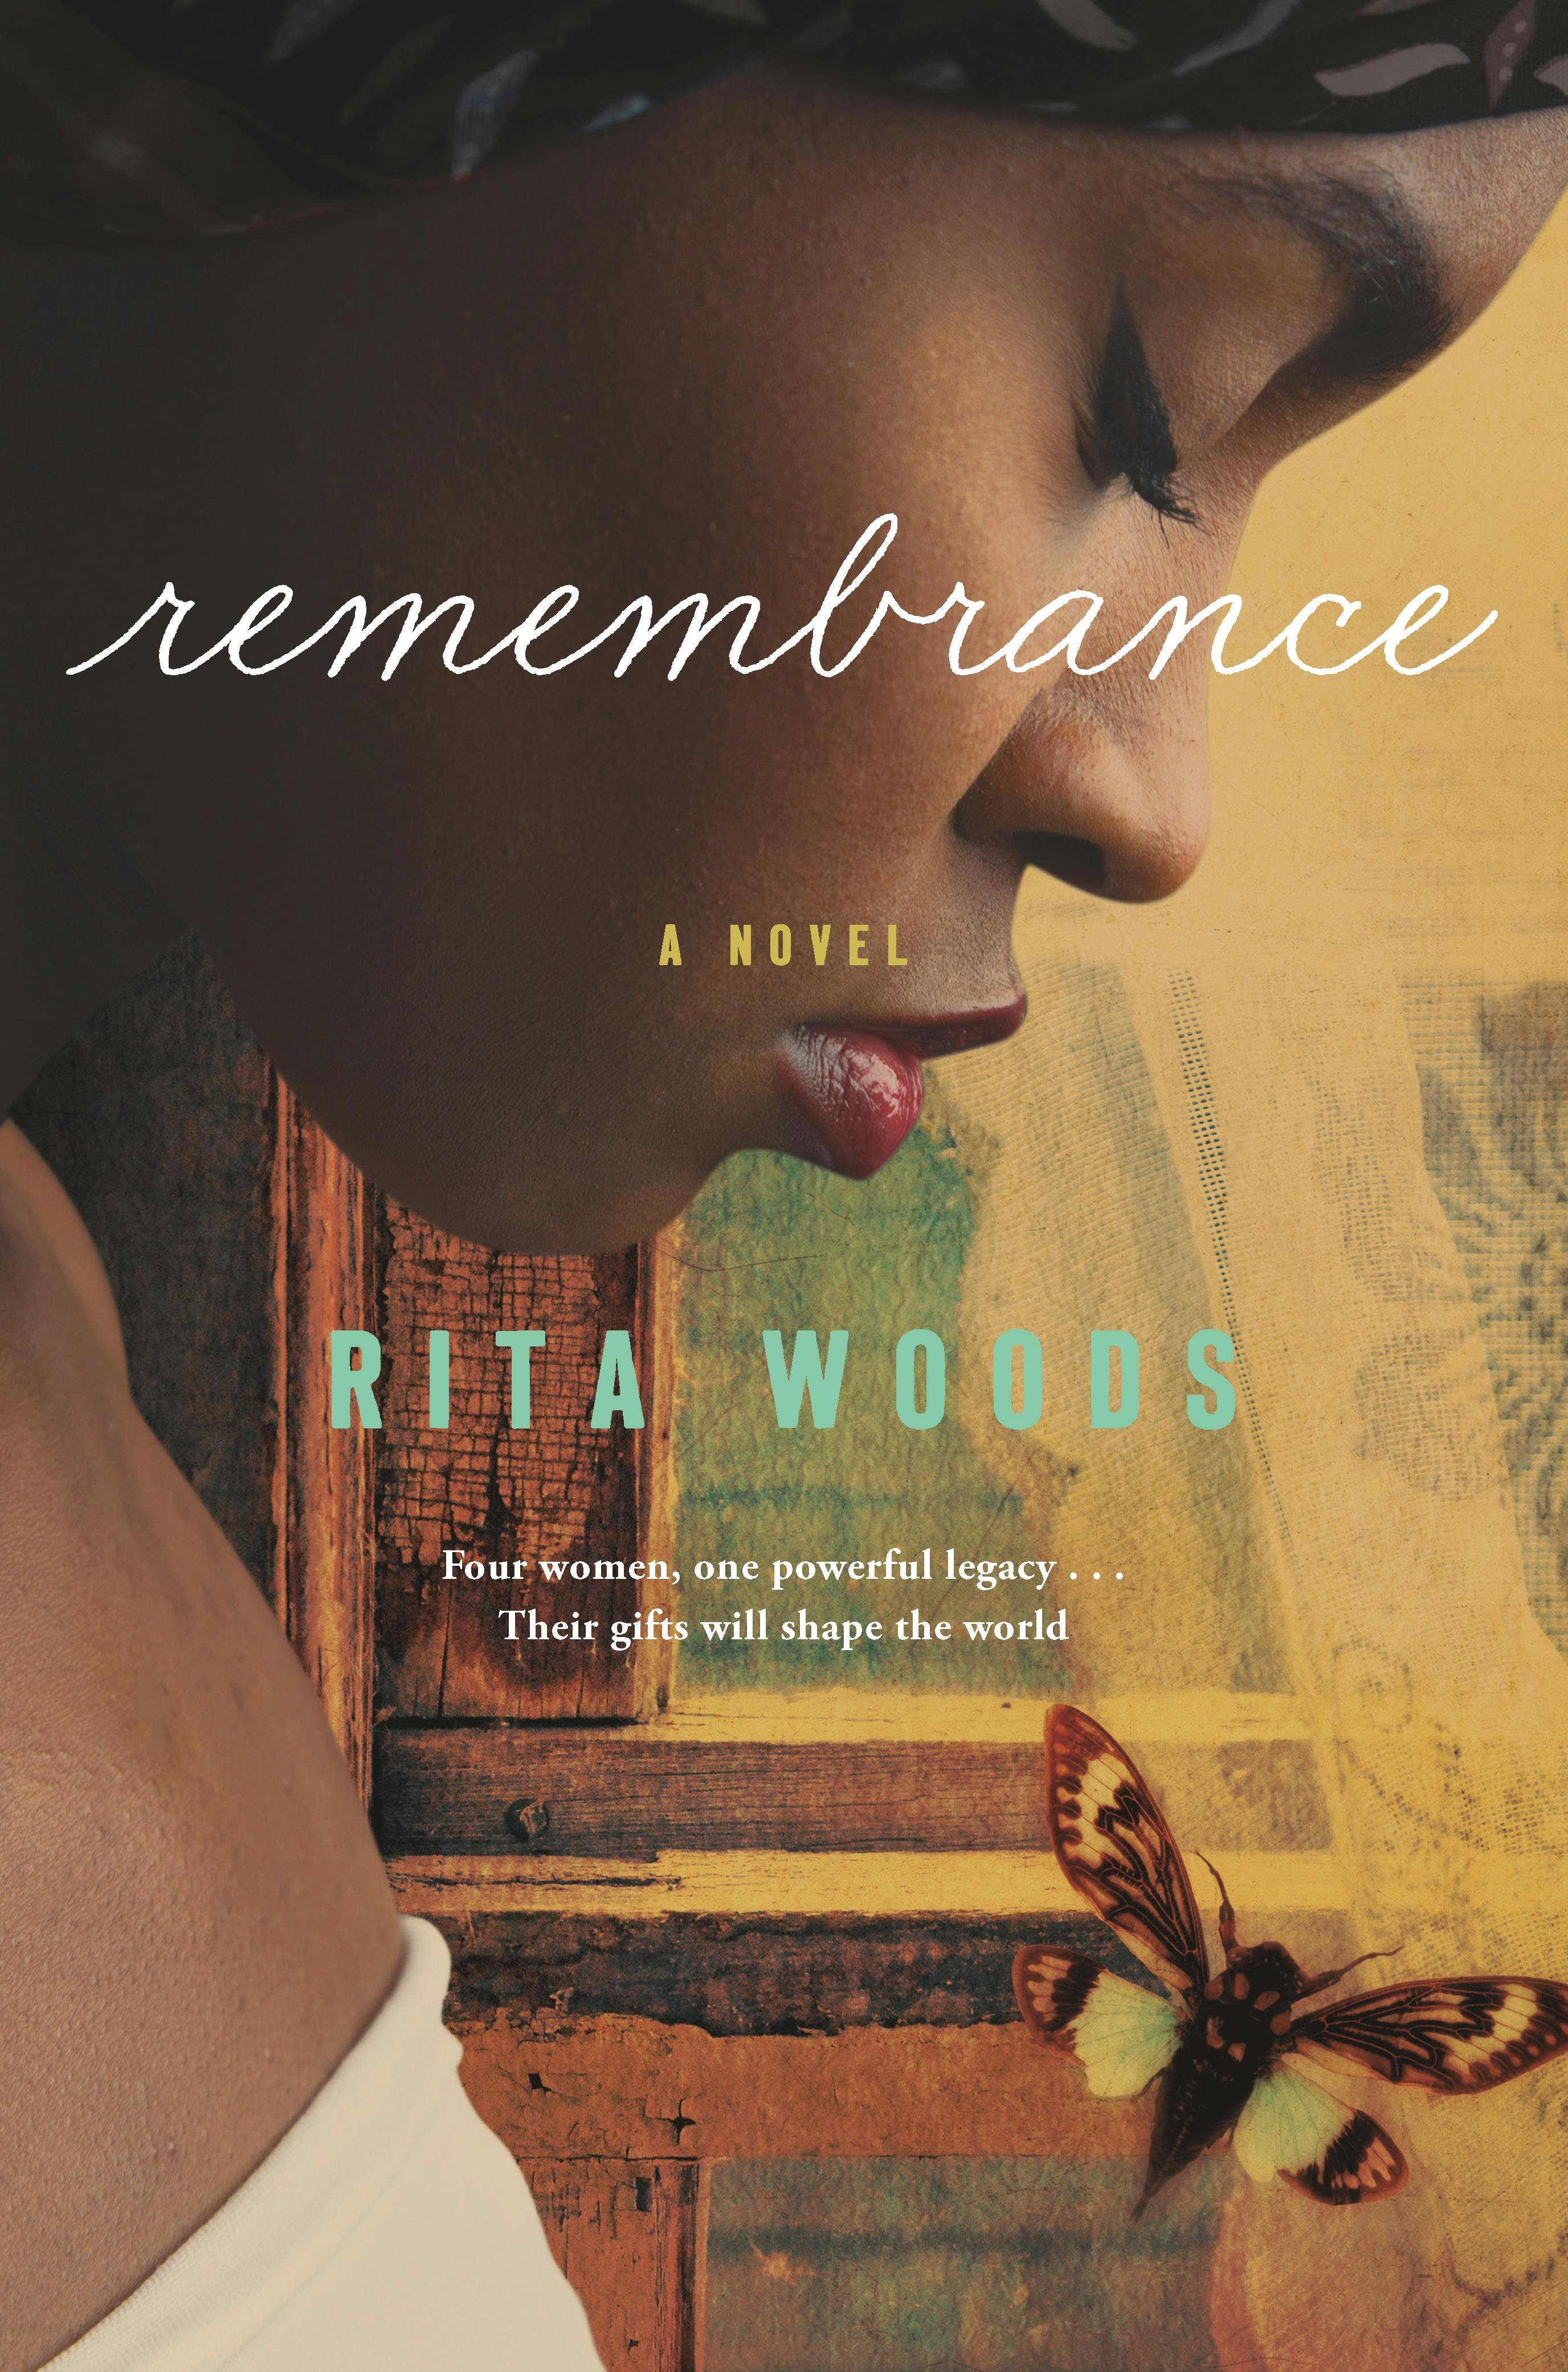 Cover for the book titled as: Remembrance